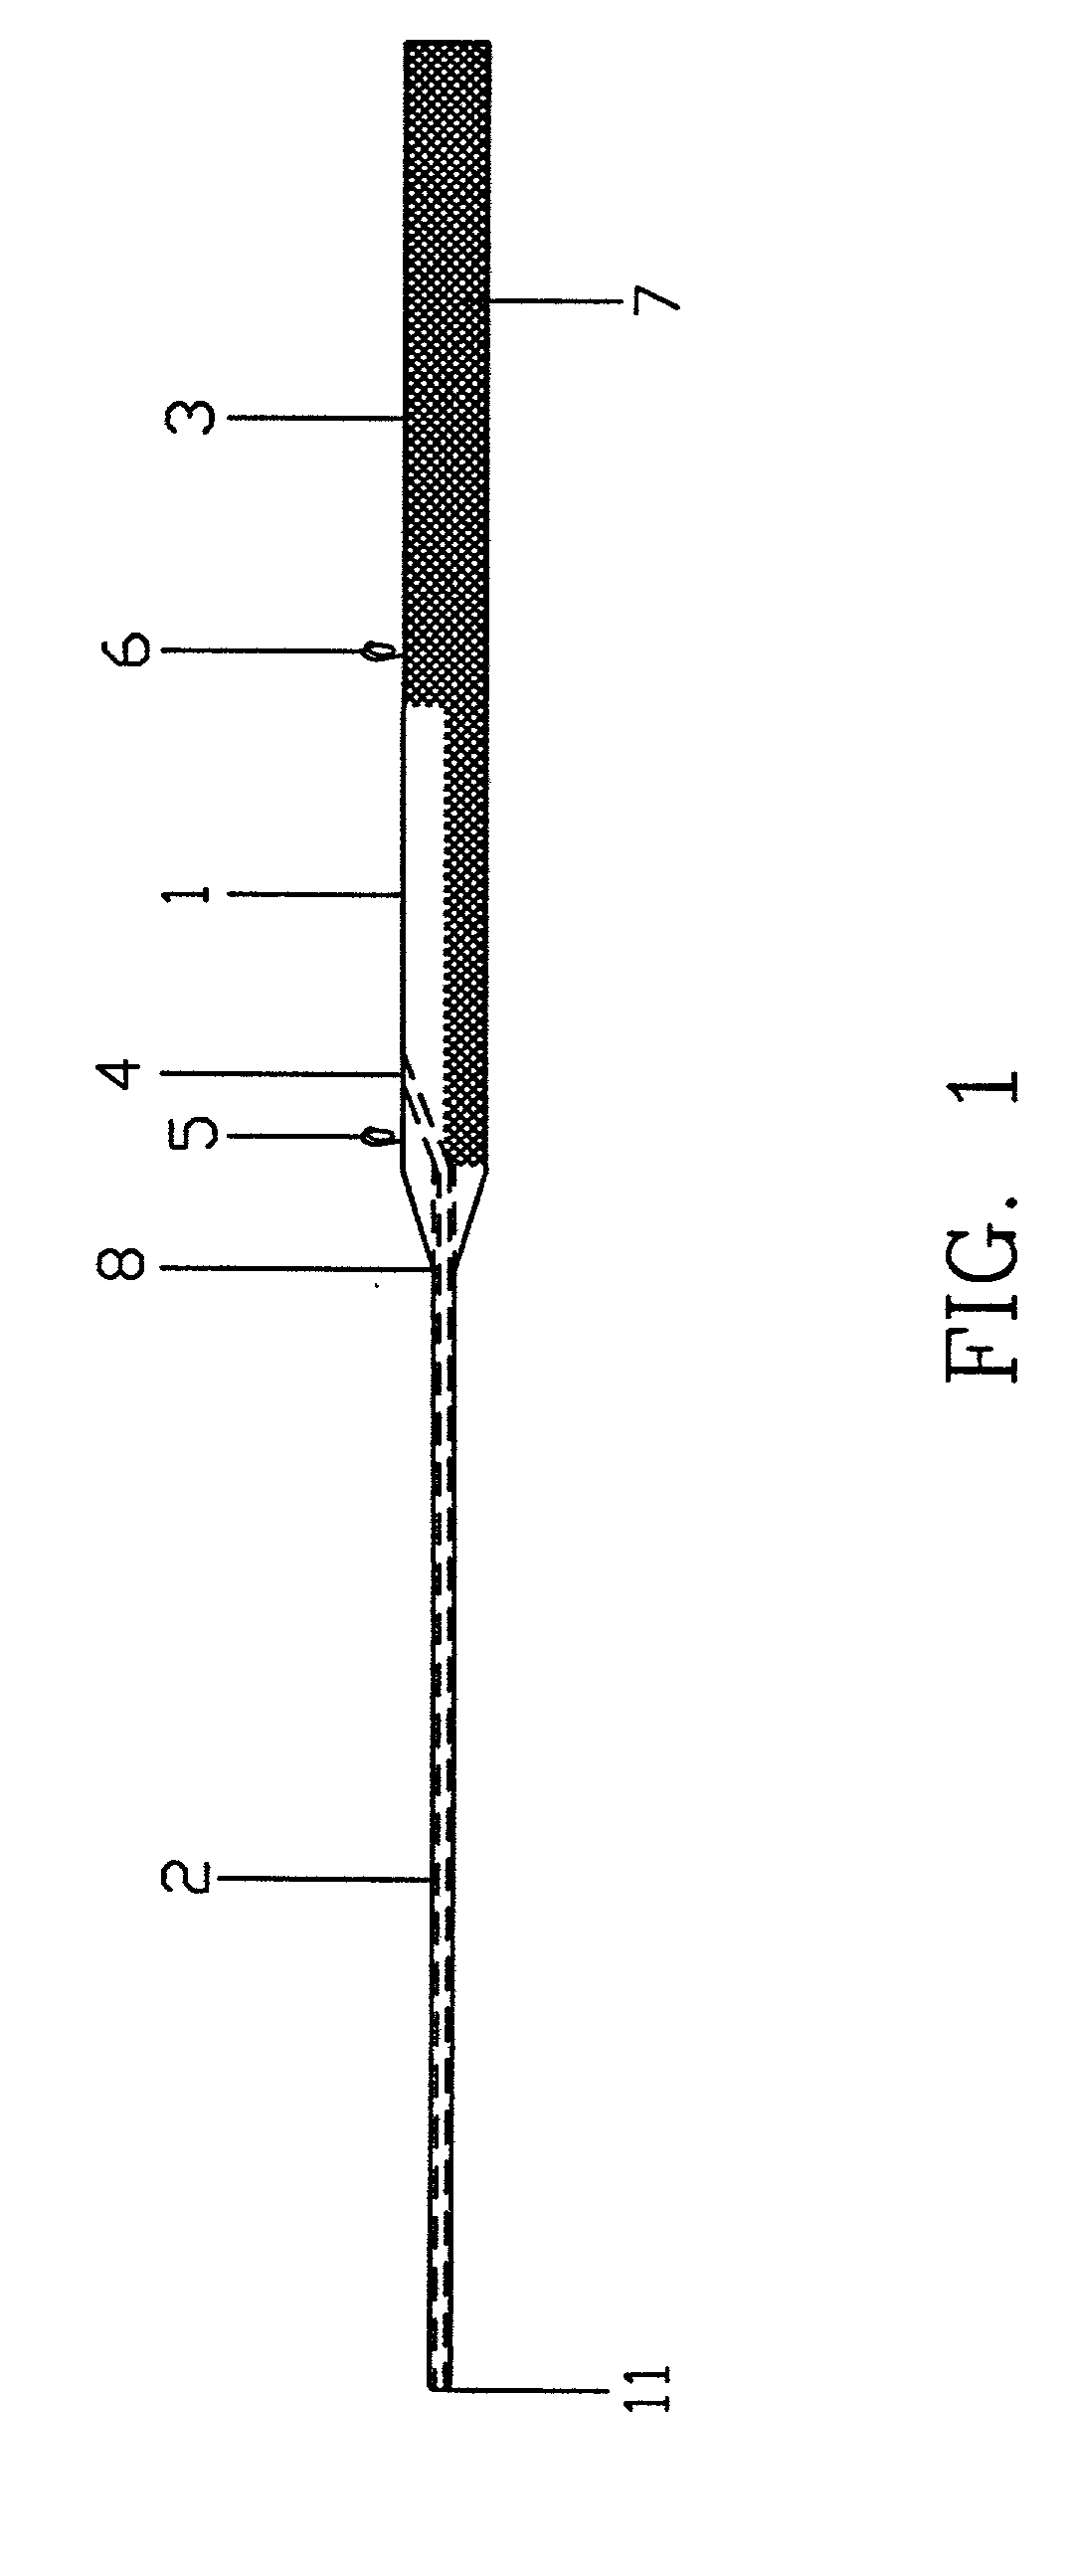 Surgical repair kit and its method of use